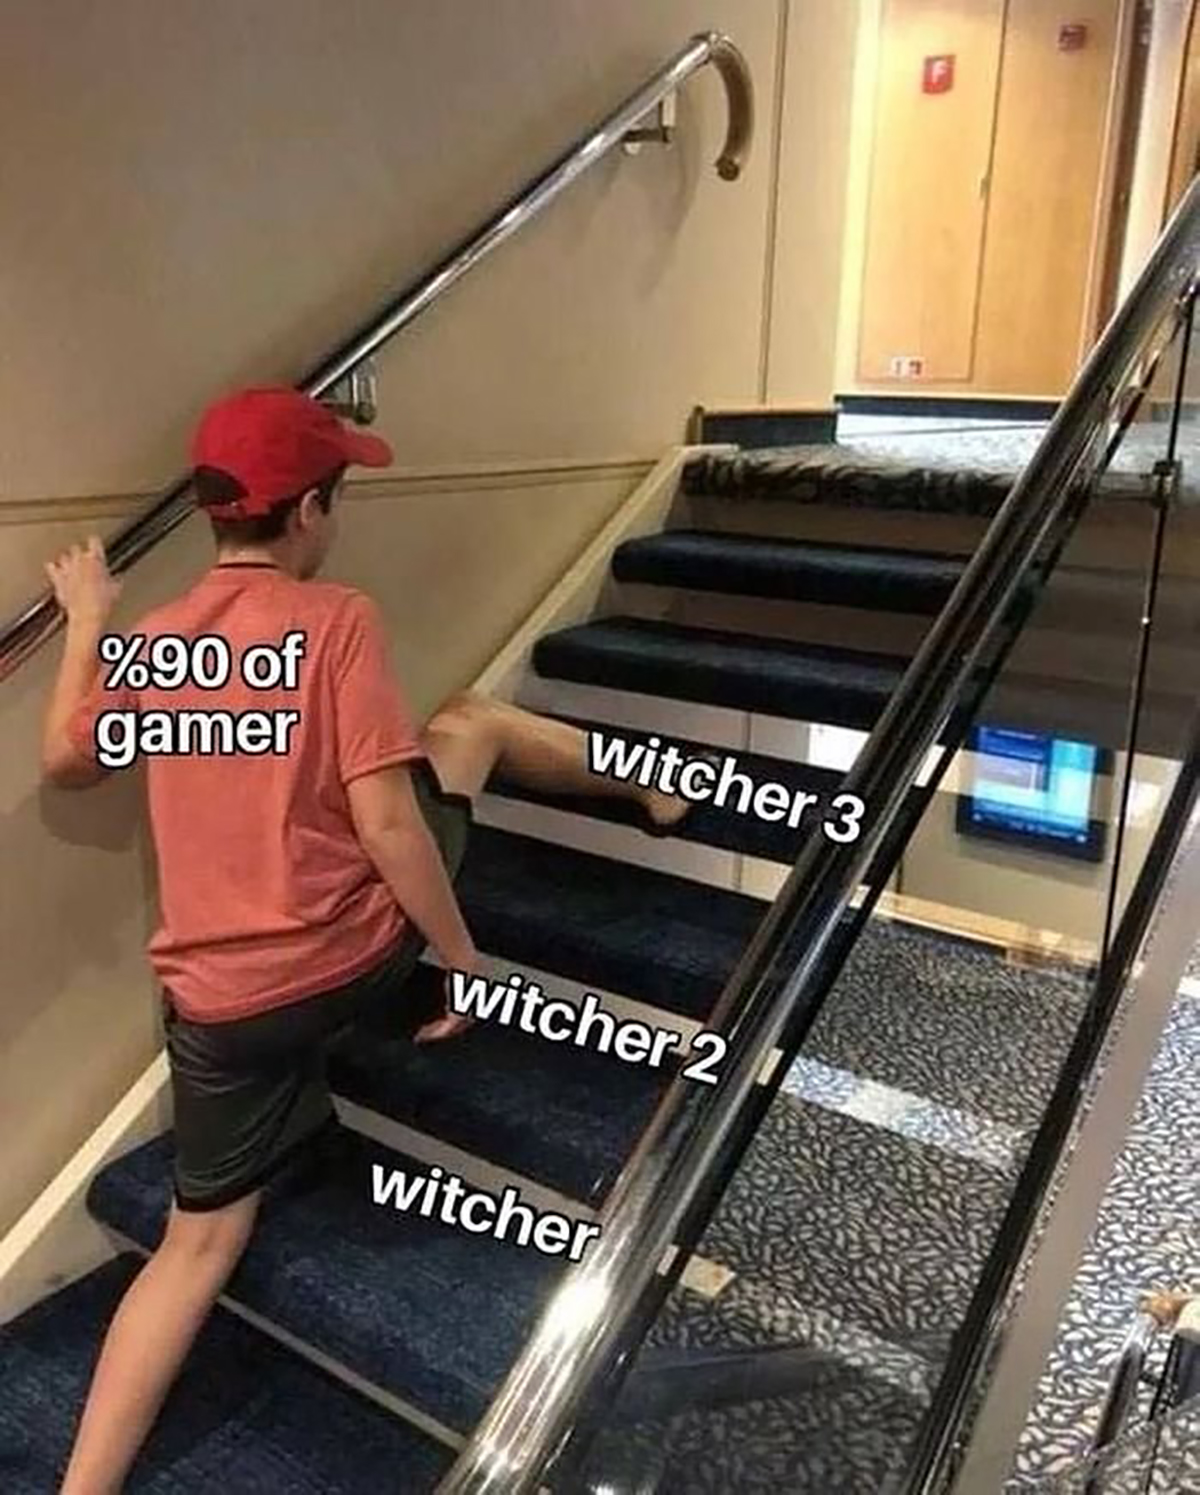 gaming memes - white man will try to satisfy us conomic equity and justice - %90 of gamer witcher 3 witcher 2 witcher